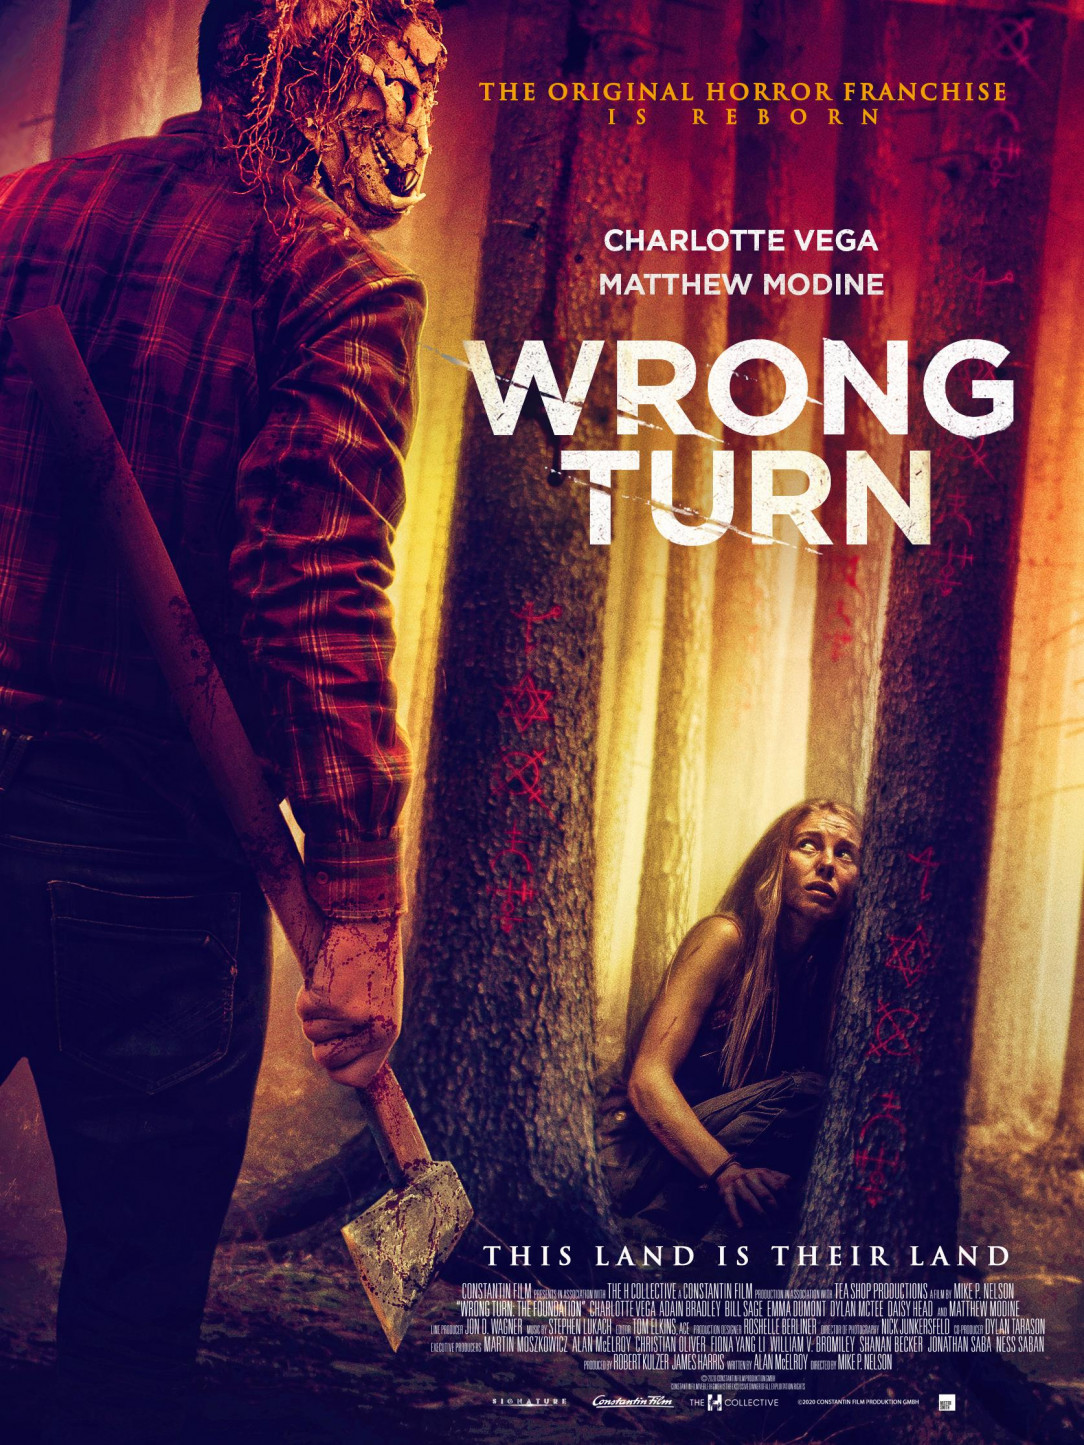 Official UK Poster for WRONG TURN Reboot!